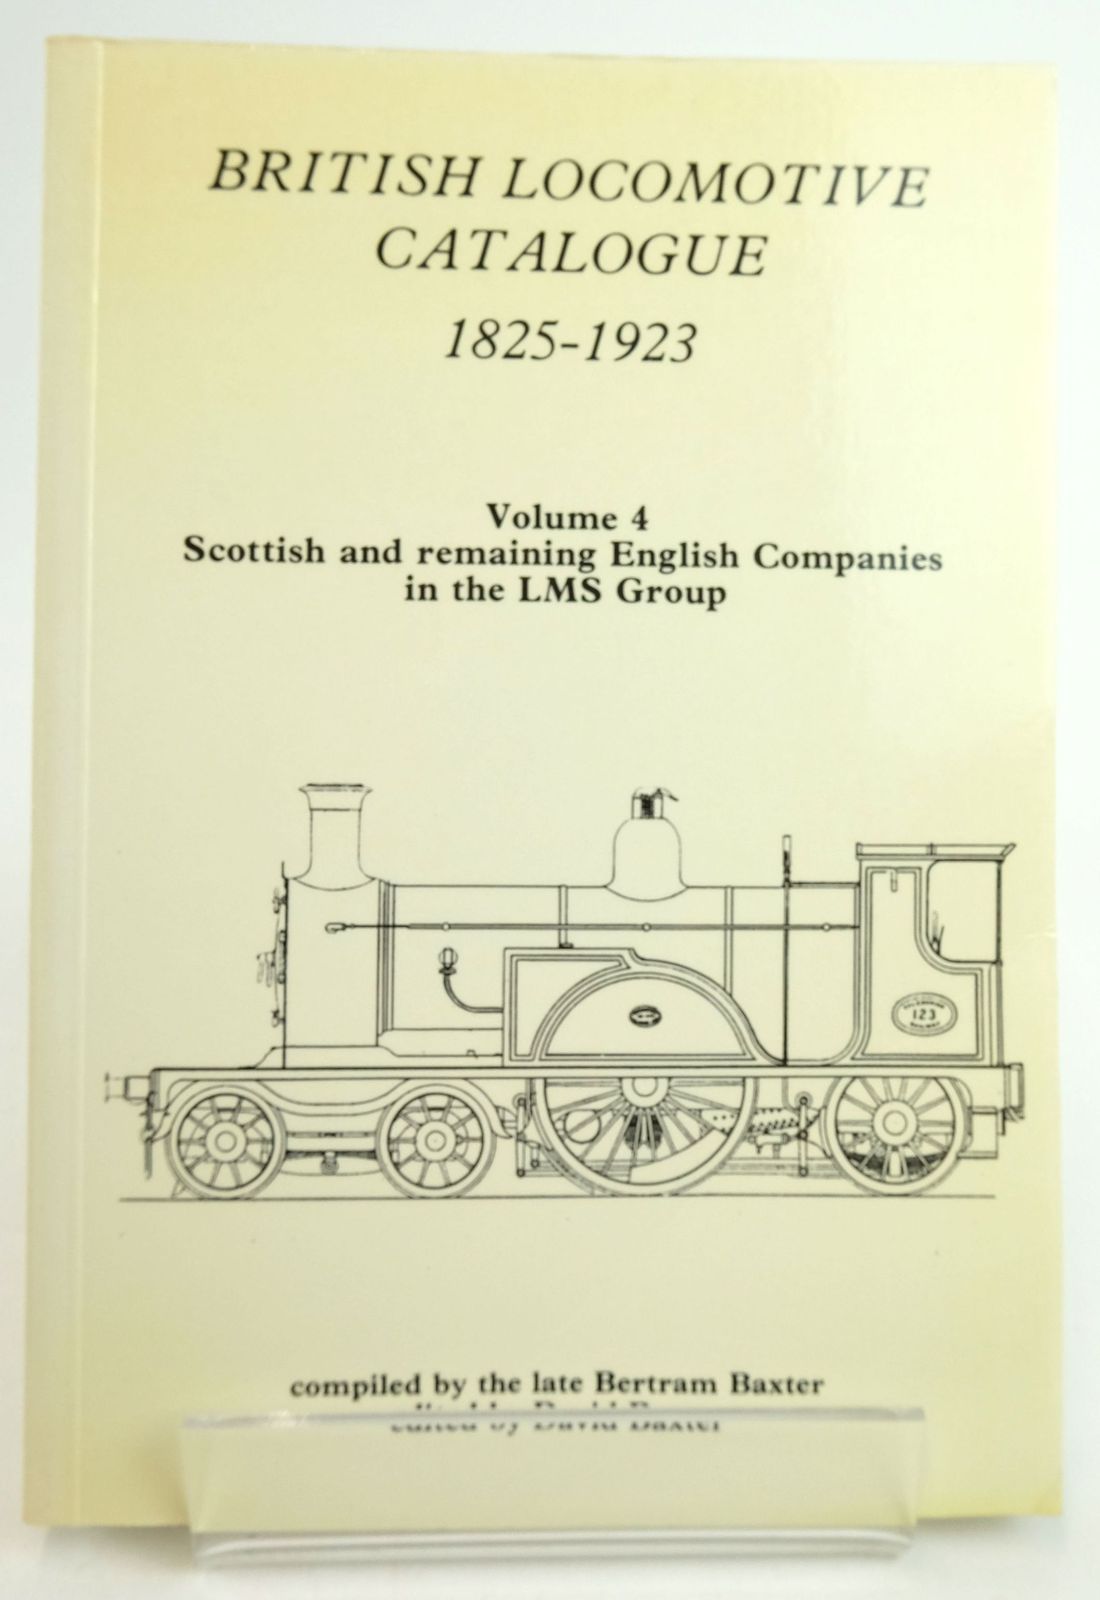 Photo of BRITISH LOCOMOTIVE CATALOGUE 1825-1923 VOLUME 4 - SCOTTISH AND REMAINING ENGLISH COMPANIES IN THE LMS GROUP written by Baxter, Bertram Baxter, David published by Moorland Publishing (STOCK CODE: 1819631)  for sale by Stella & Rose's Books